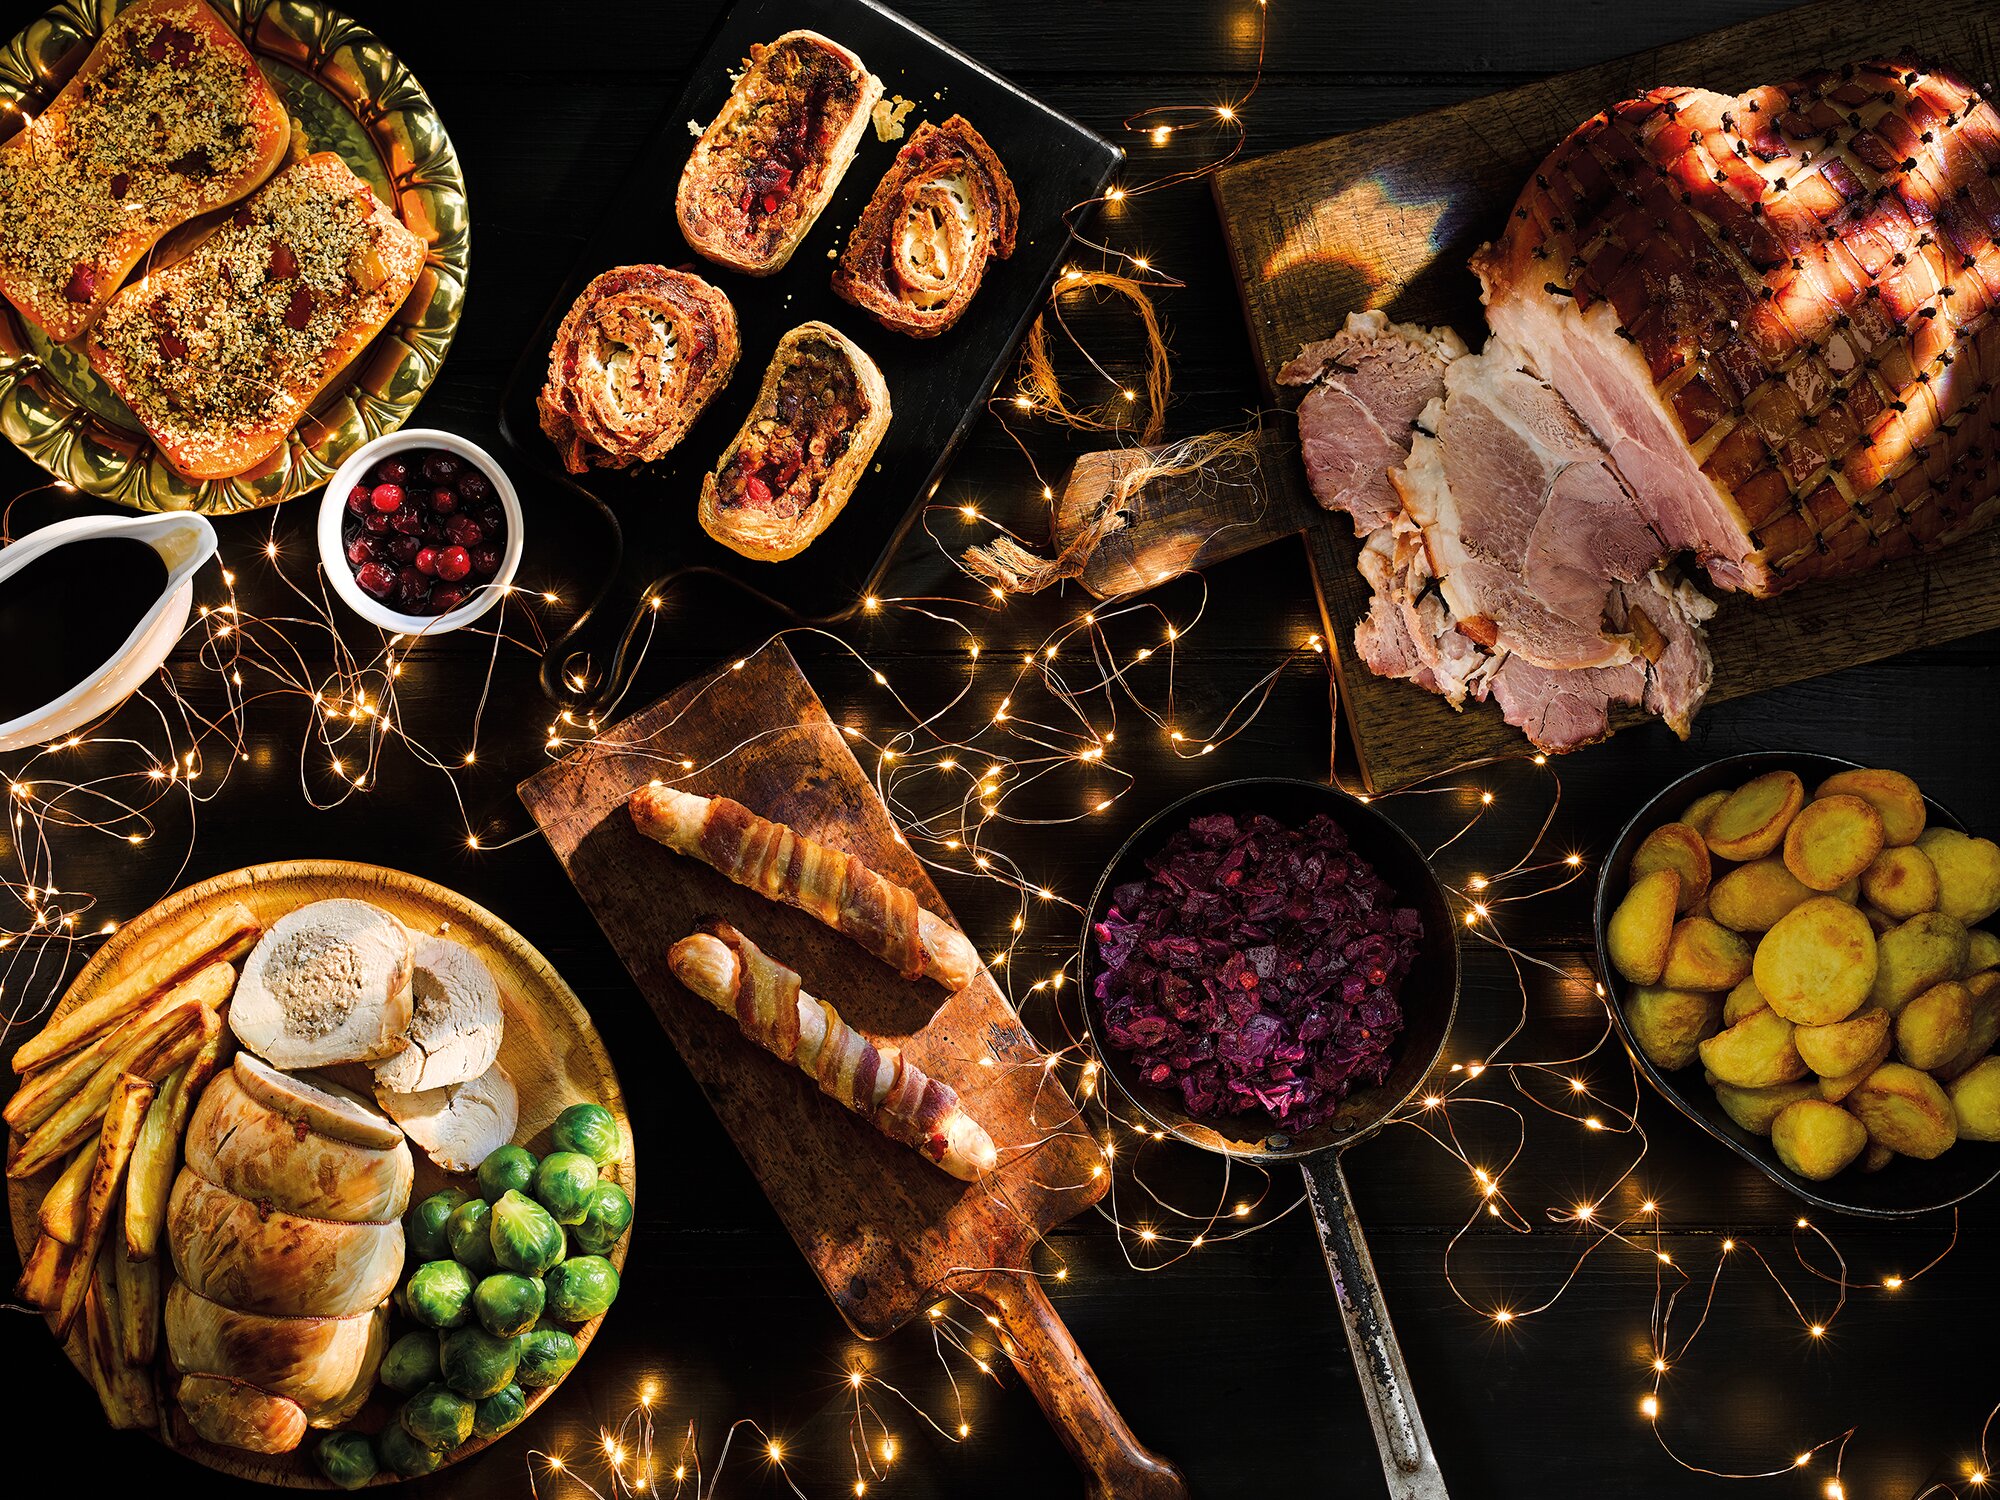 Bidfood launches Christmas 2021 range with consumer insight